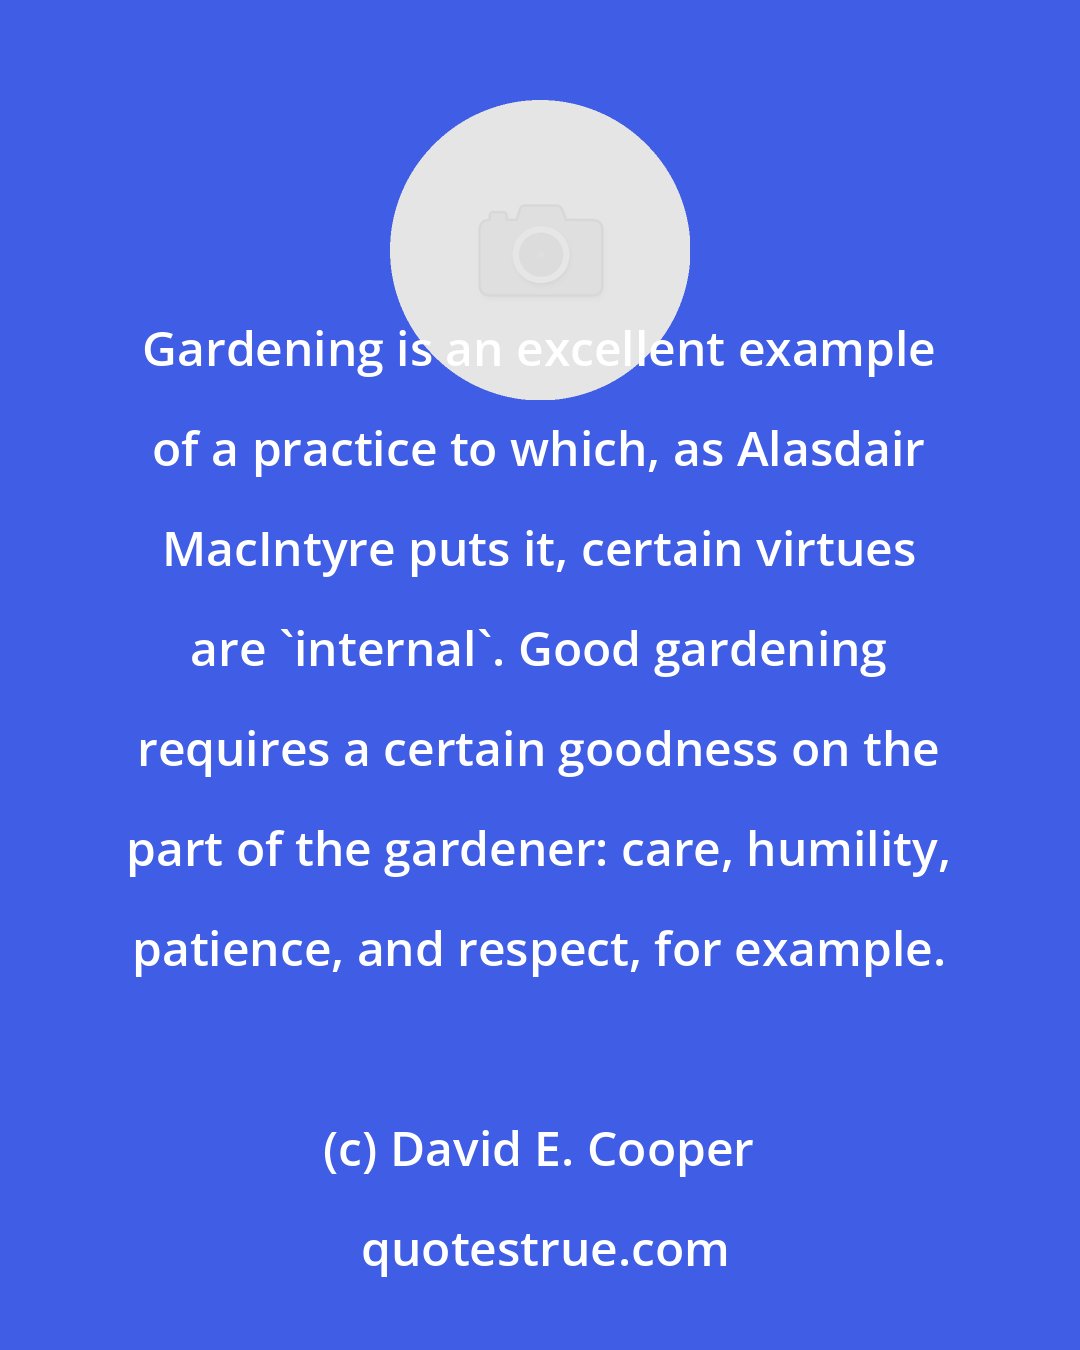 David E. Cooper: Gardening is an excellent example of a practice to which, as Alasdair MacIntyre puts it, certain virtues are 'internal'. Good gardening requires a certain goodness on the part of the gardener: care, humility, patience, and respect, for example.